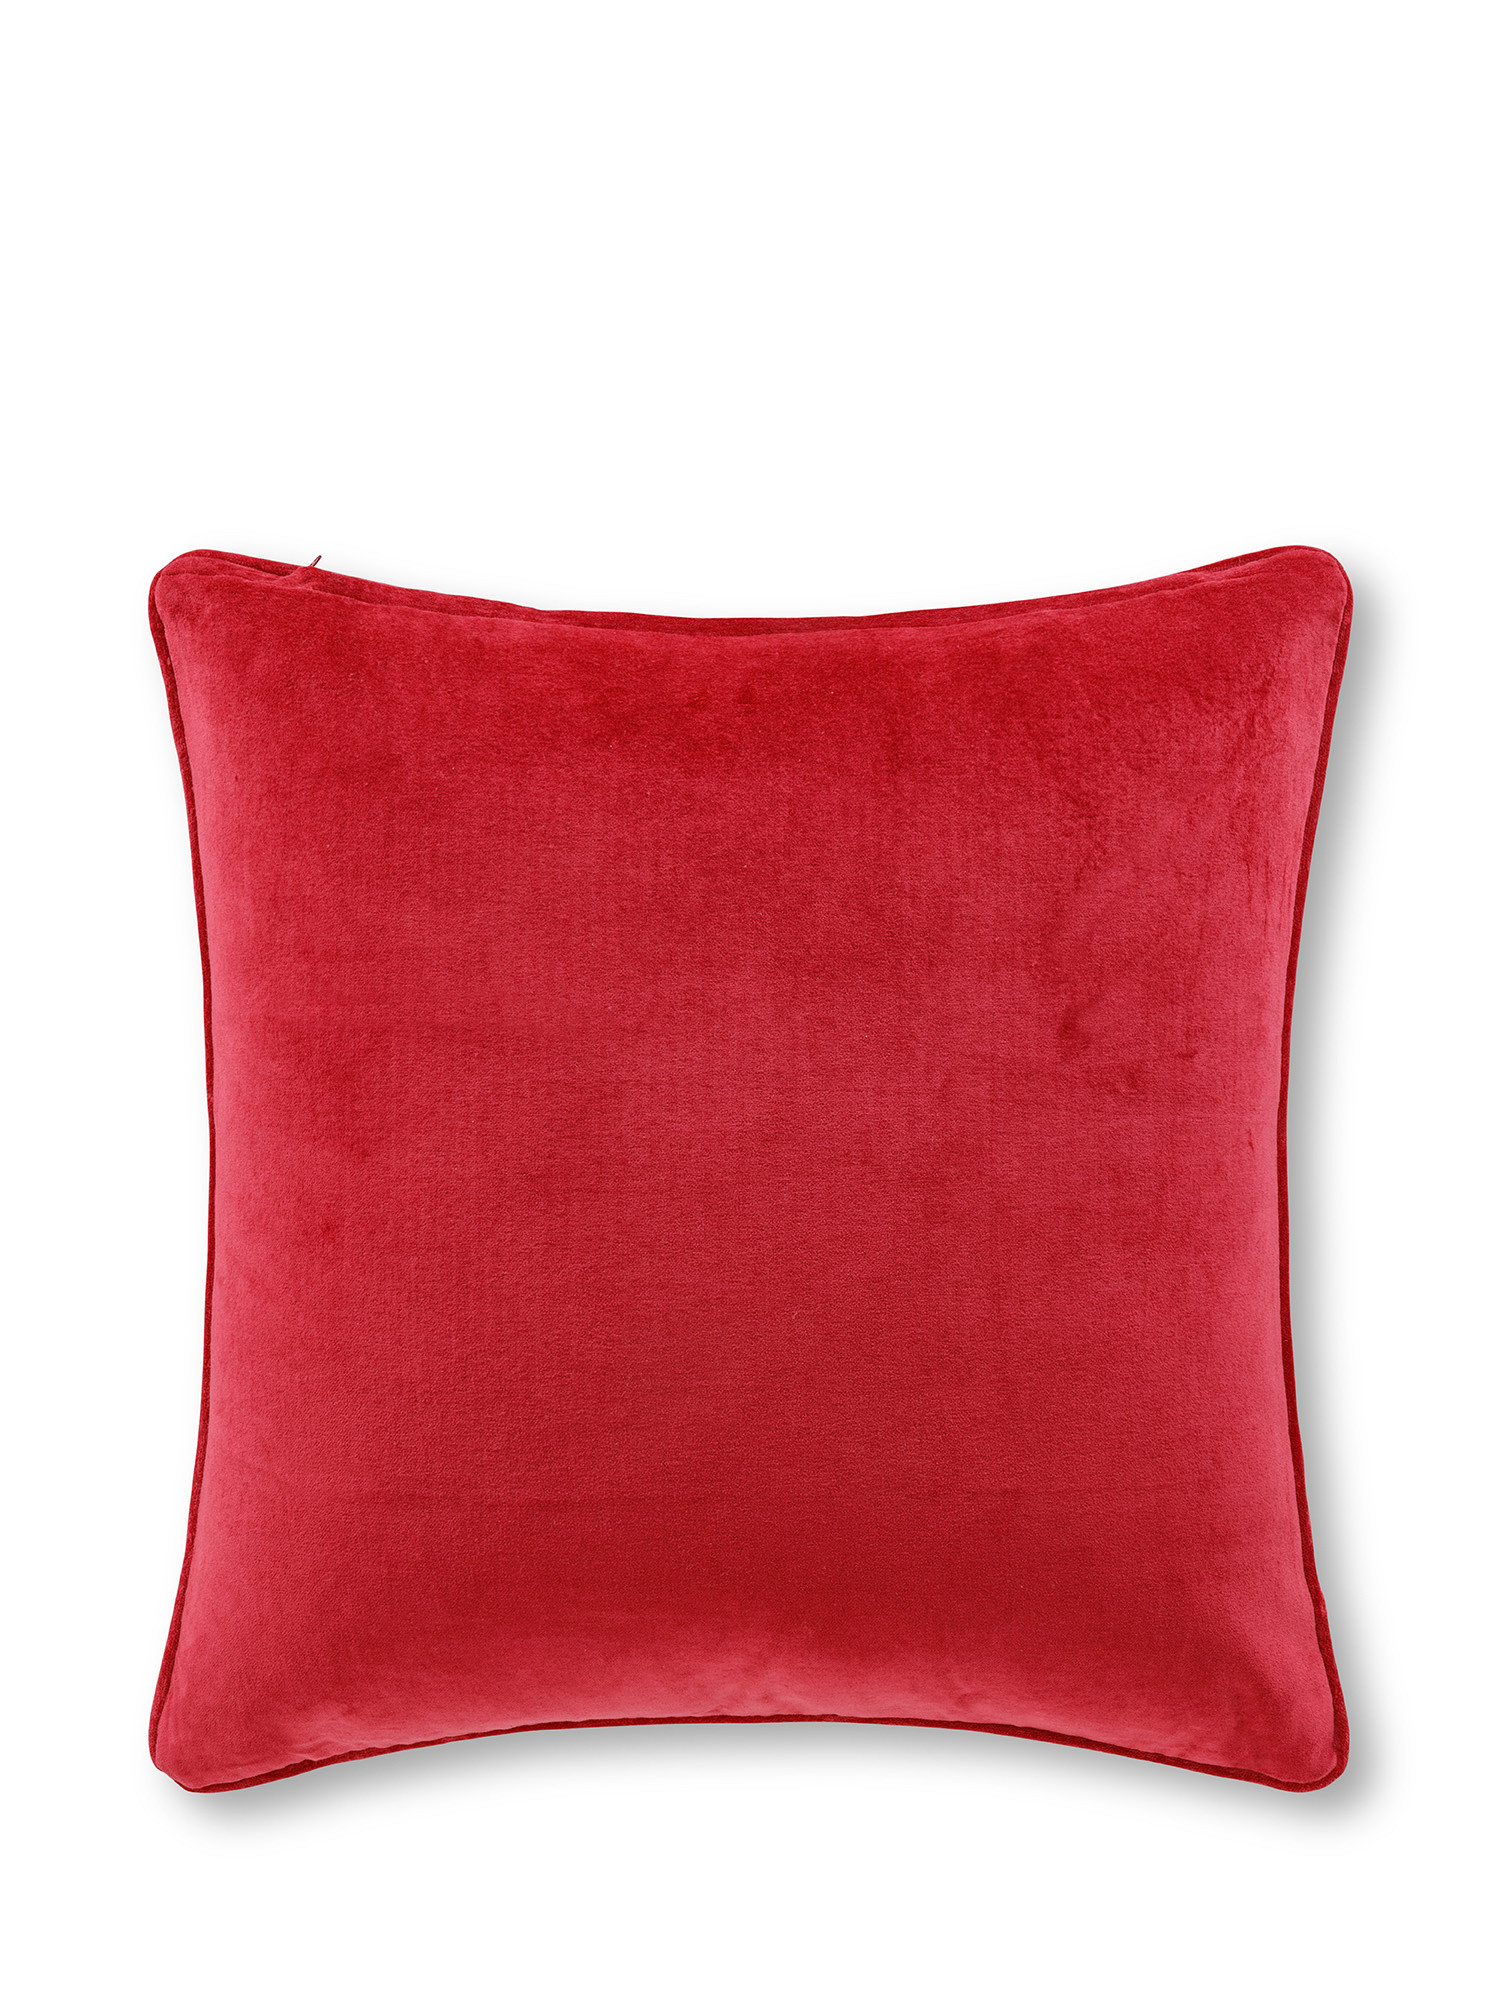 Cuscino in velluto con stelle ricamate in filo lurex 45x45 cm, Rosso, large image number 1